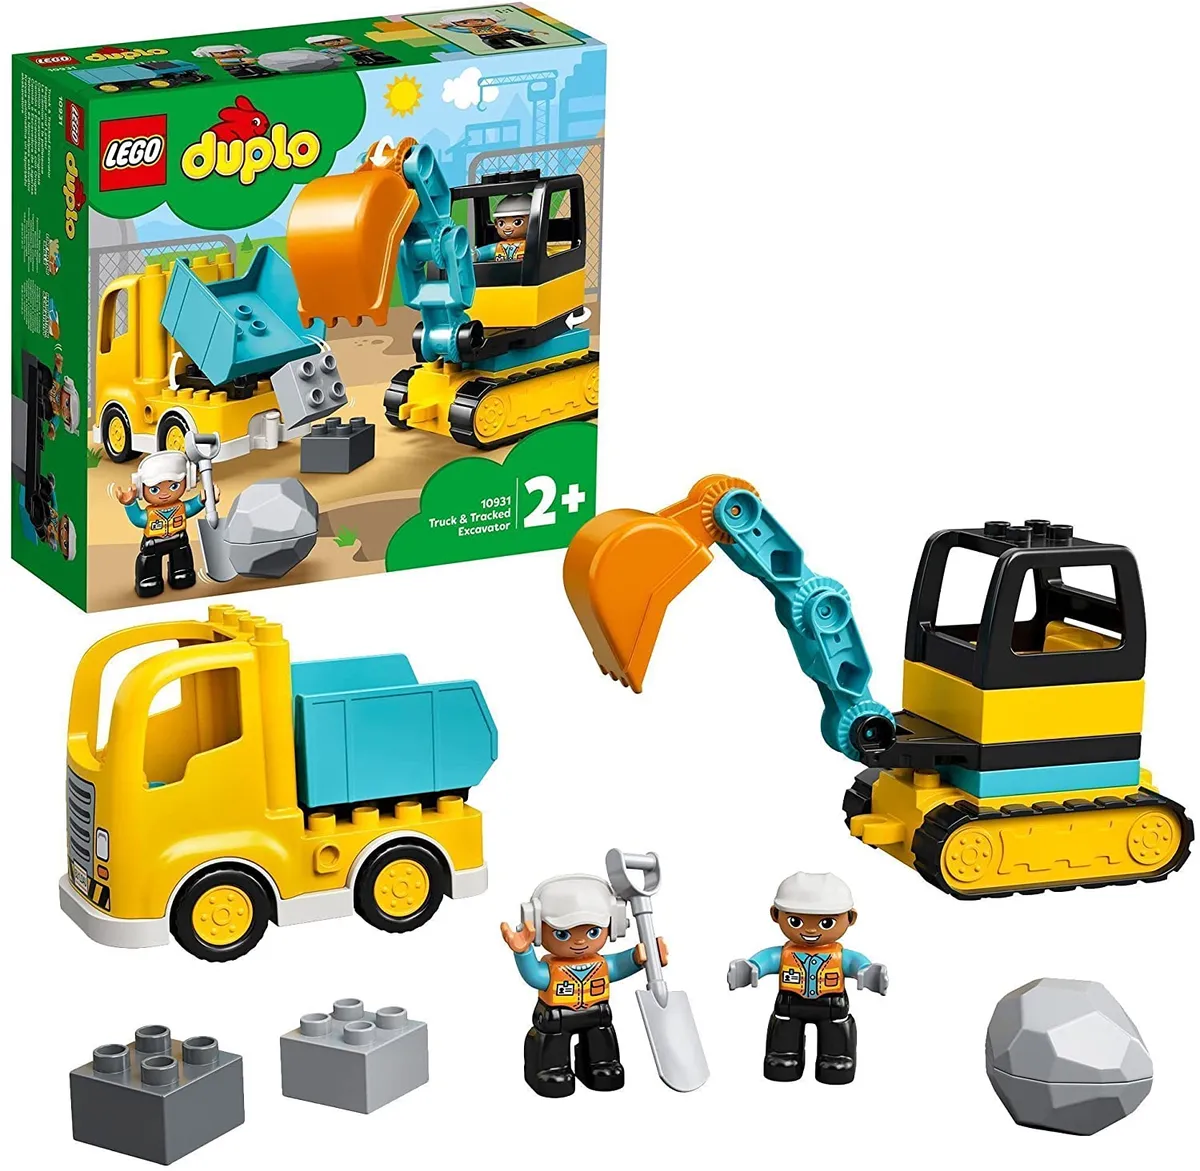 Lego Duplo Set Truck and Tracked Digger Set